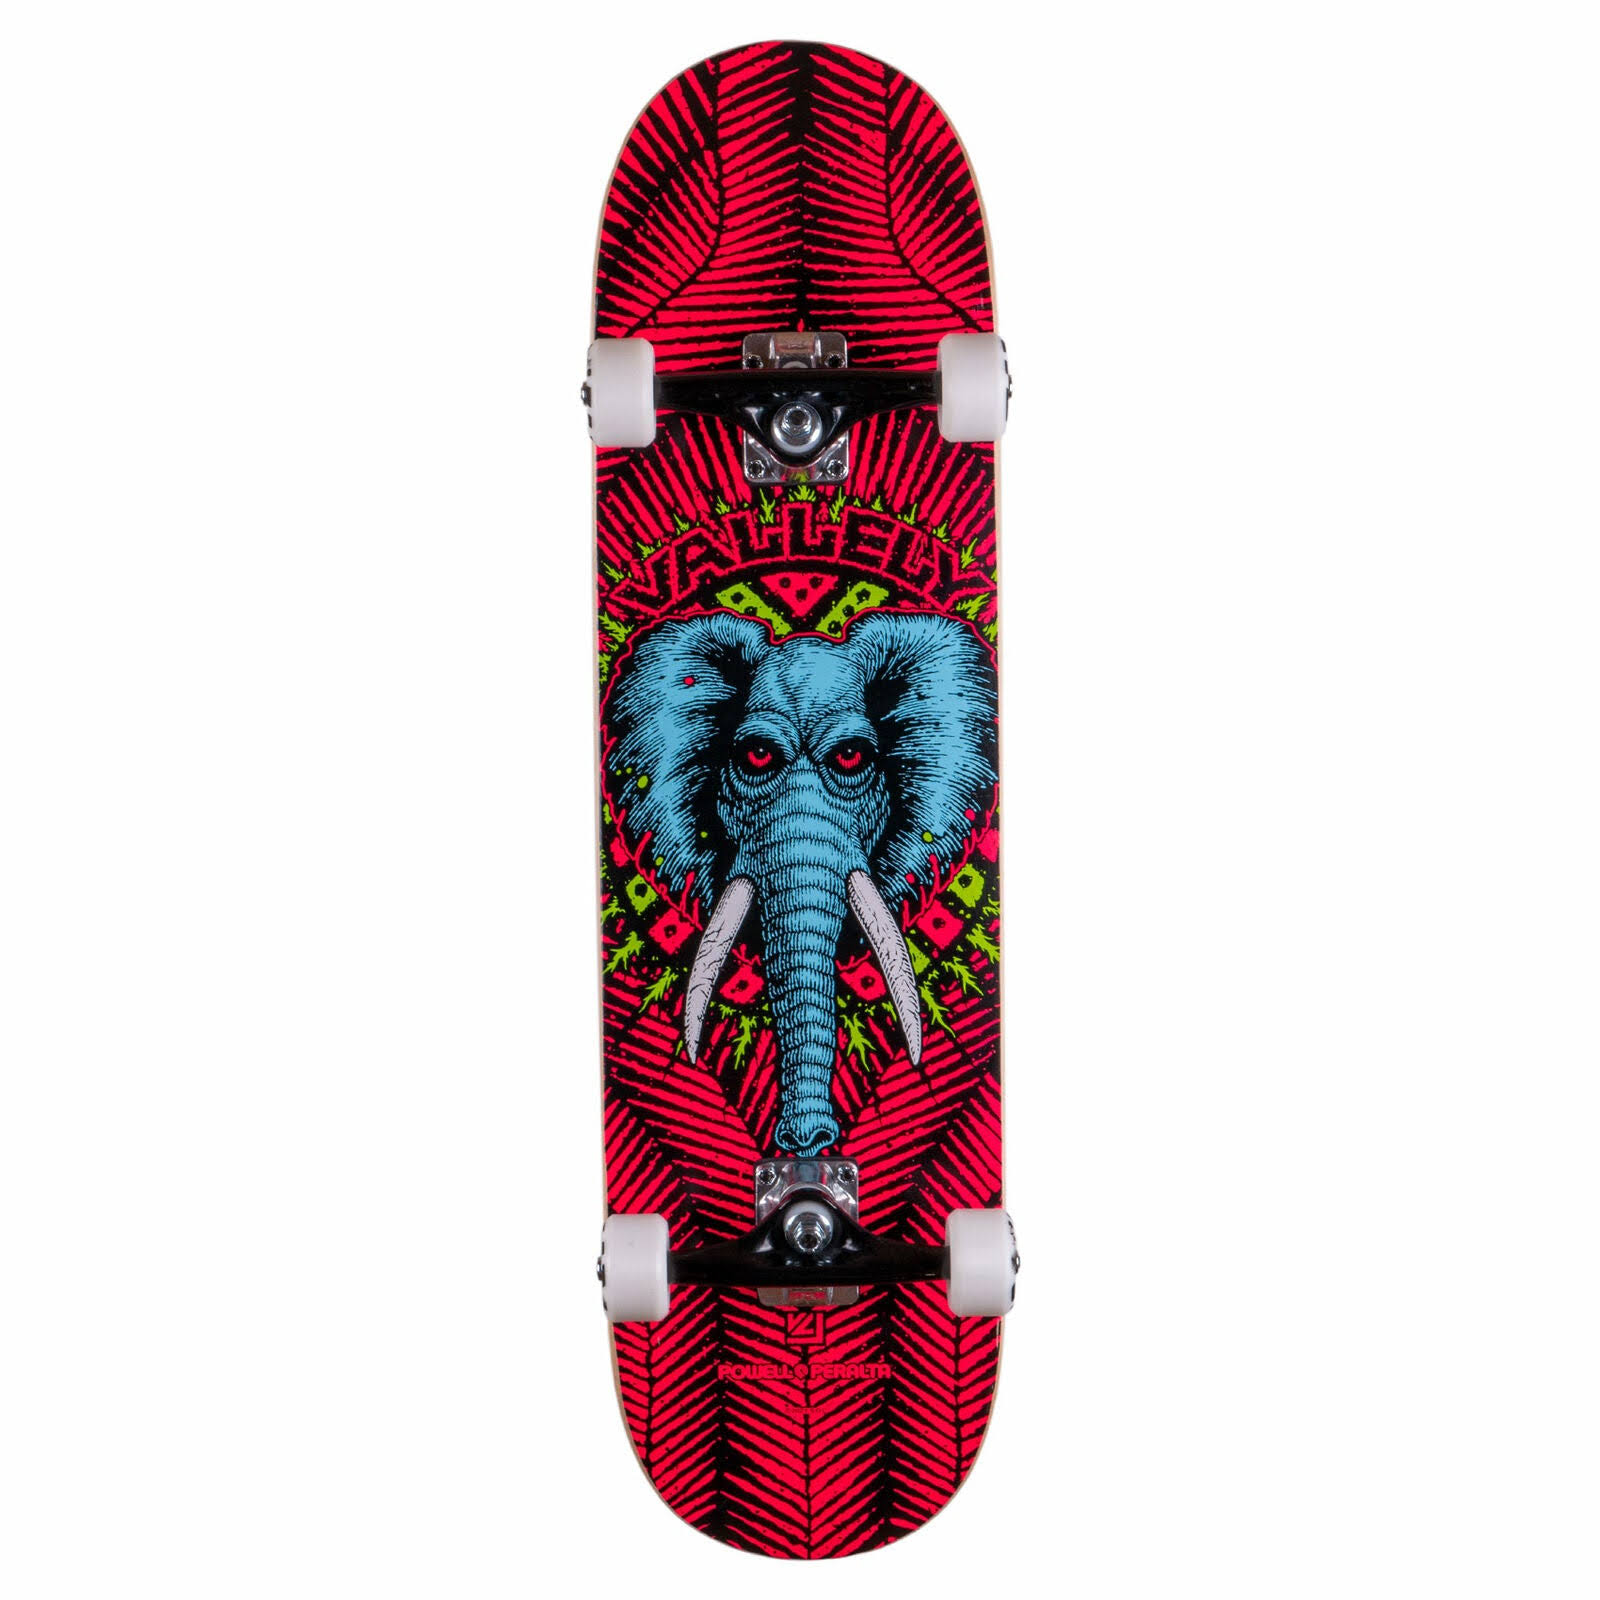 Powell Peralta Vallely Elephant Complete Skateboard Pink 8.25″